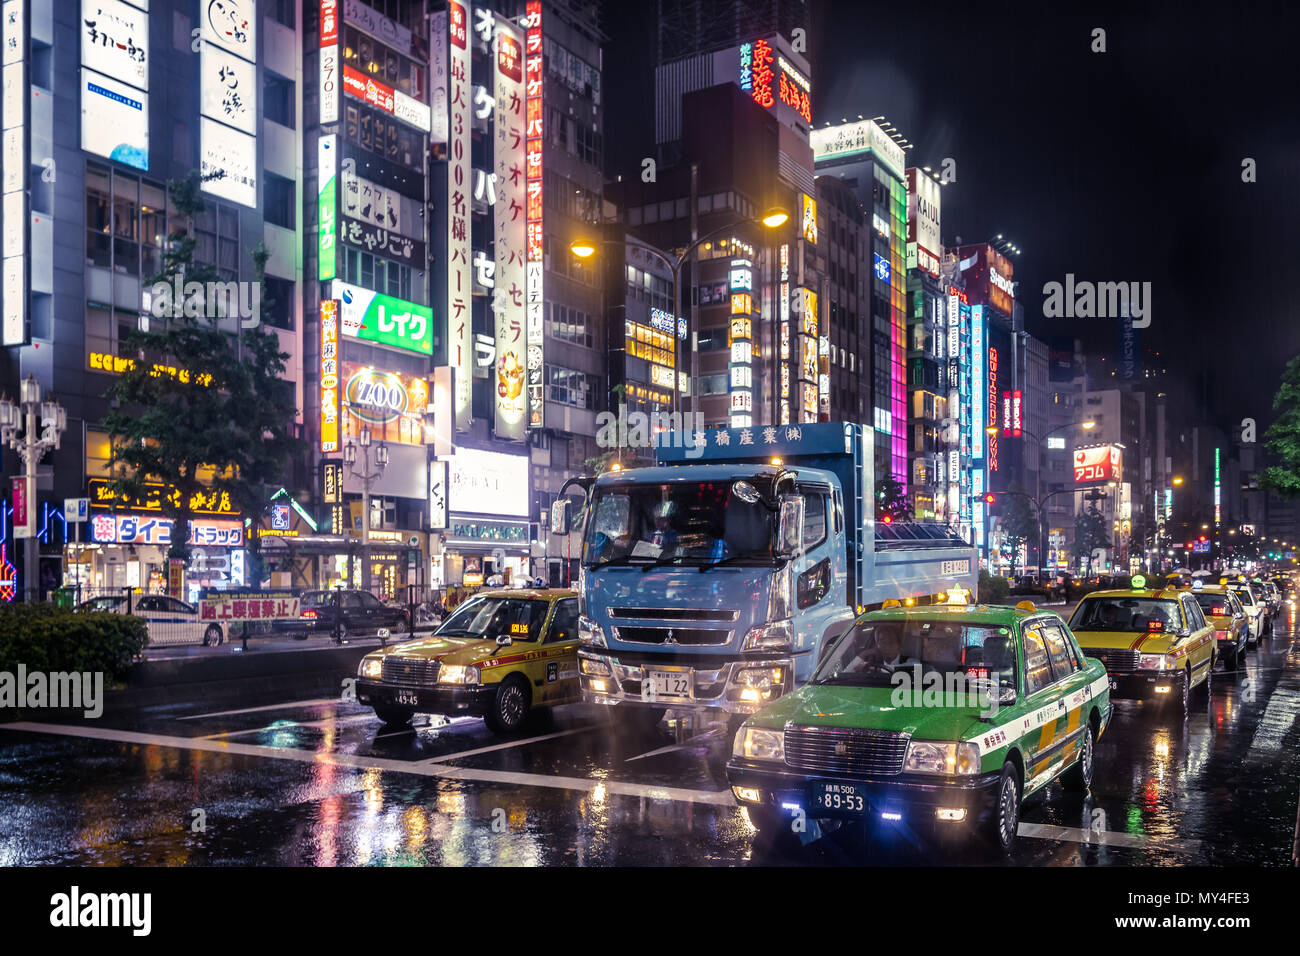 Neon lights on a busy street at night in Tokyo Stock Photo